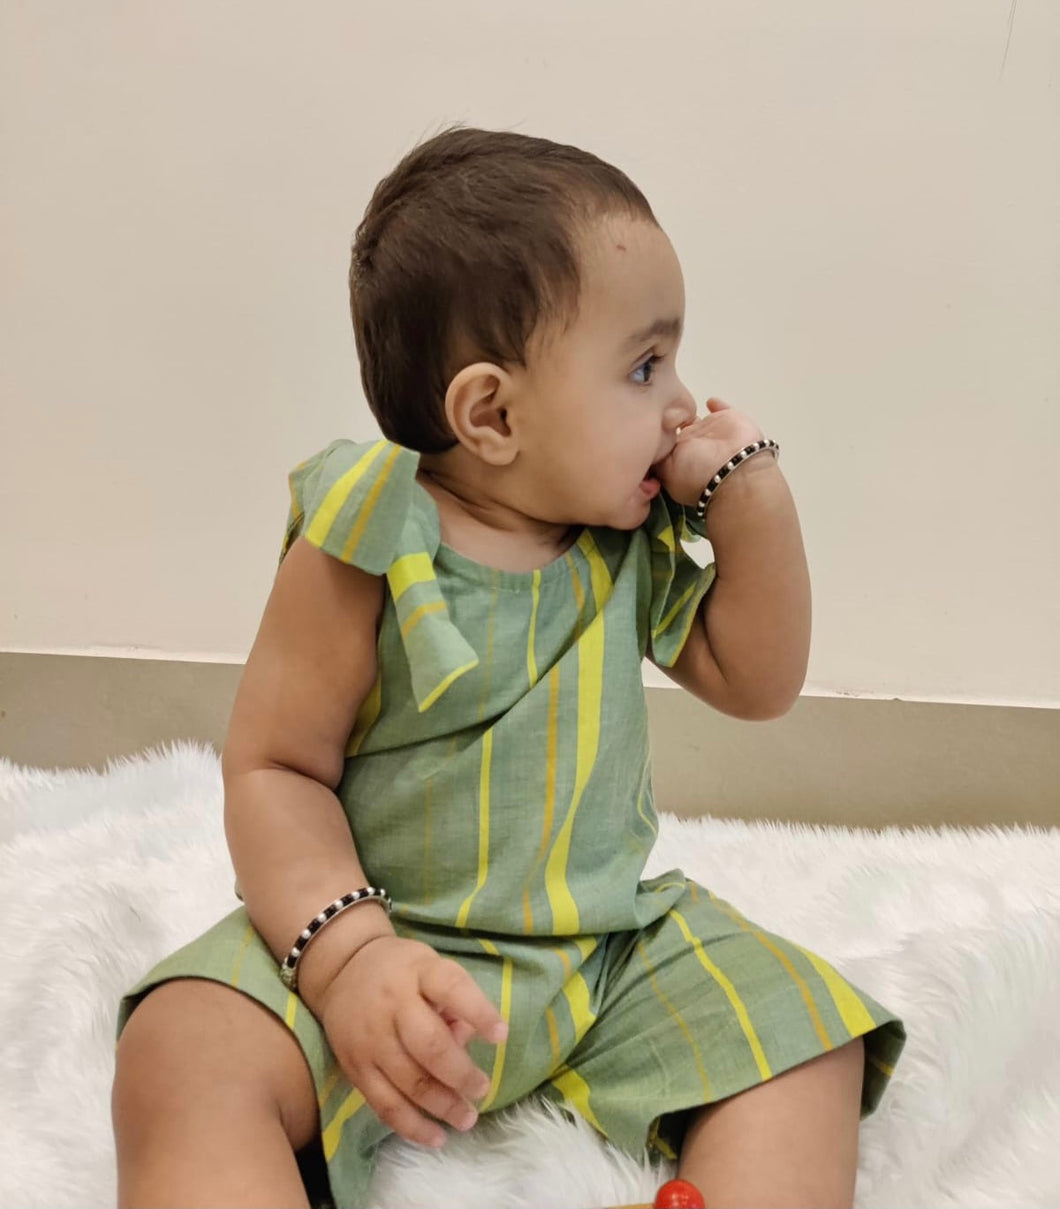 Girls Basil-Green Stripes and Ties Romper (0-7 Years)